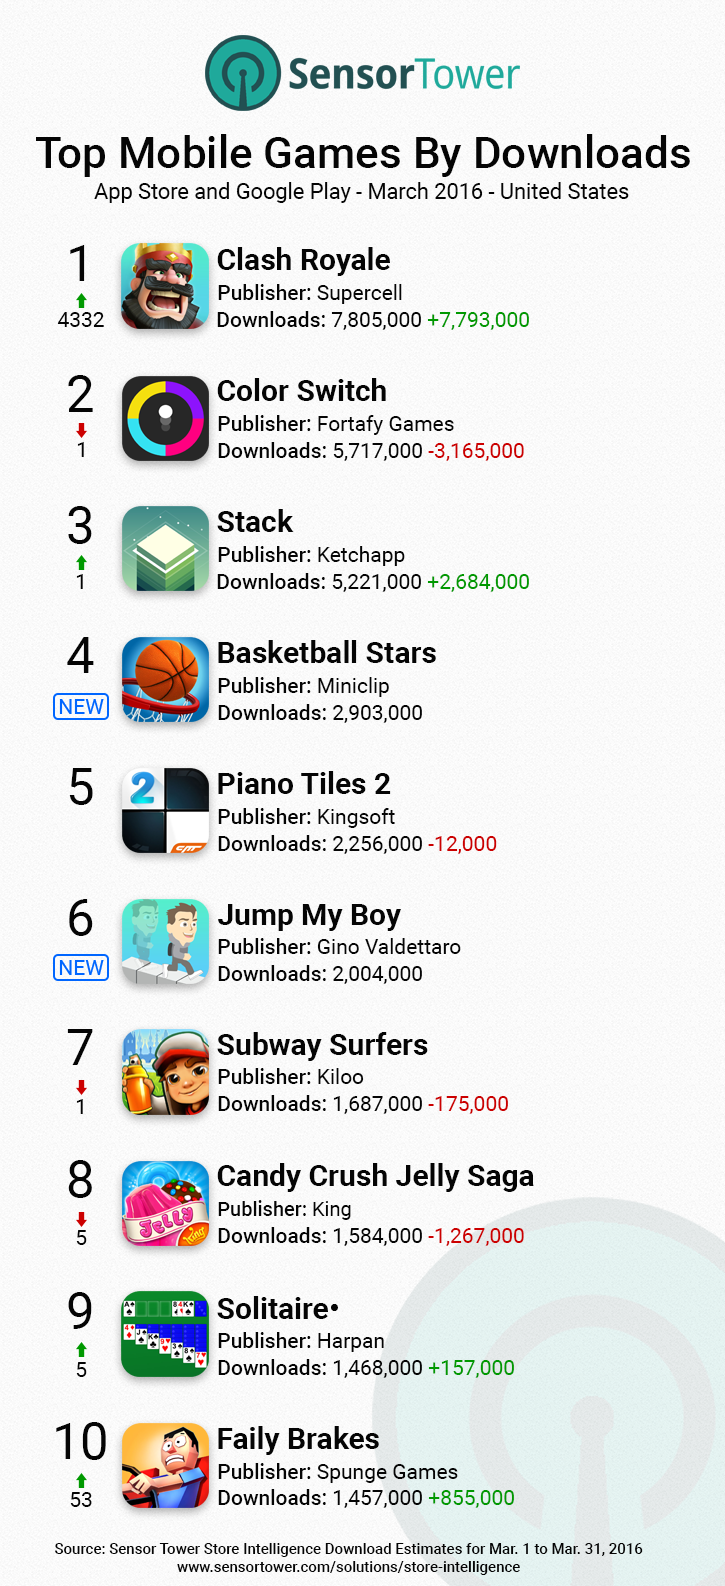 Mobile Games Top Downloads United States March 2016